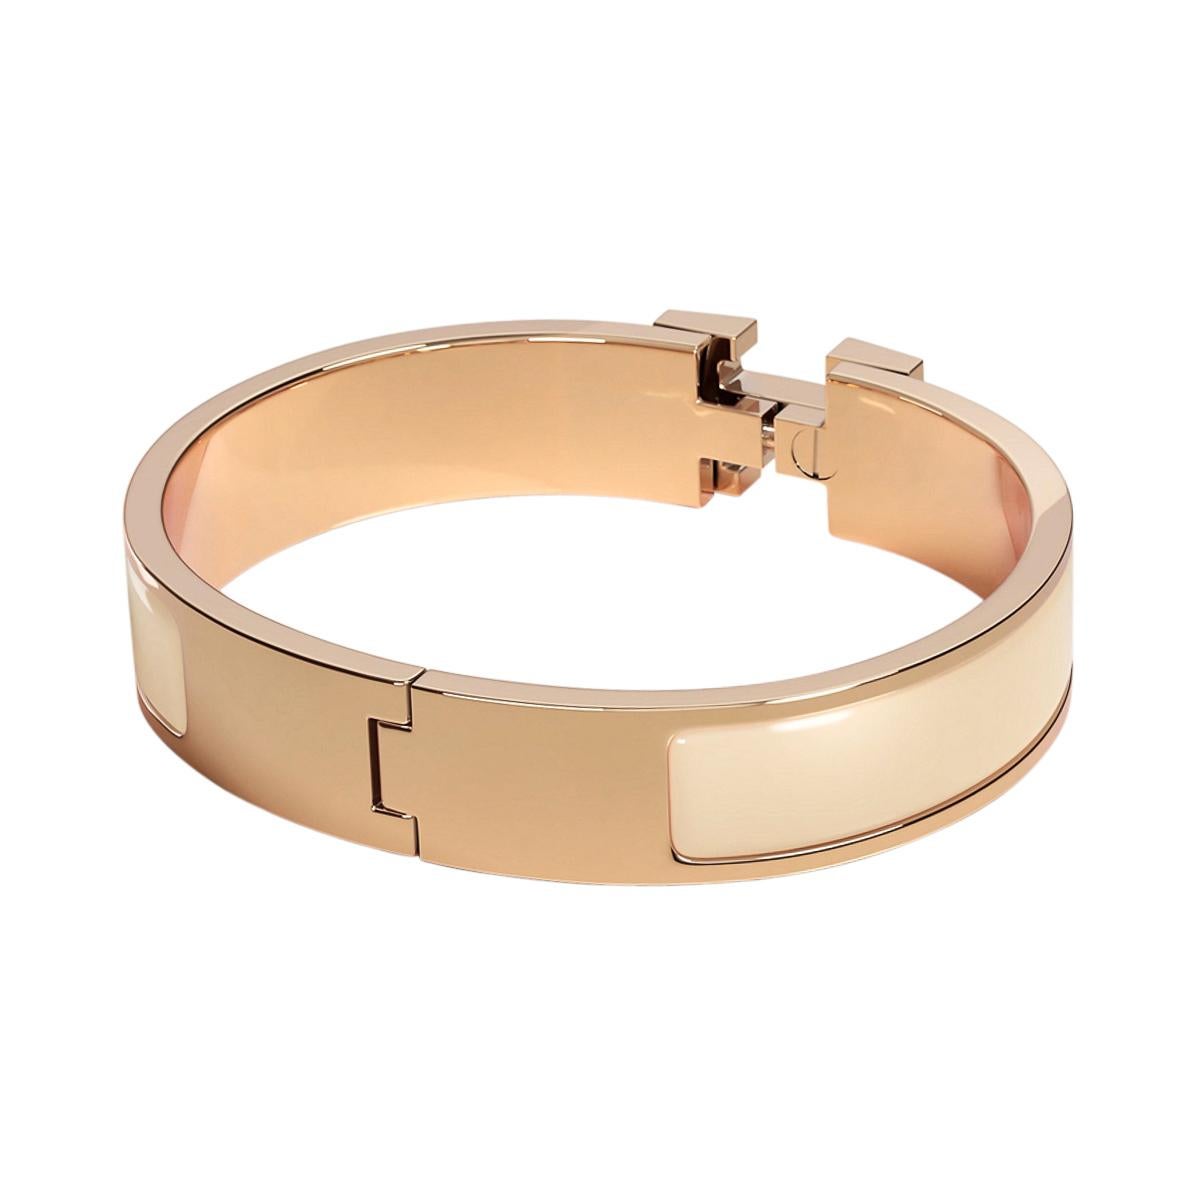 Hermes Creme Clic H Schmales Emaille-Armband Rose Gold PM im Angebot 2